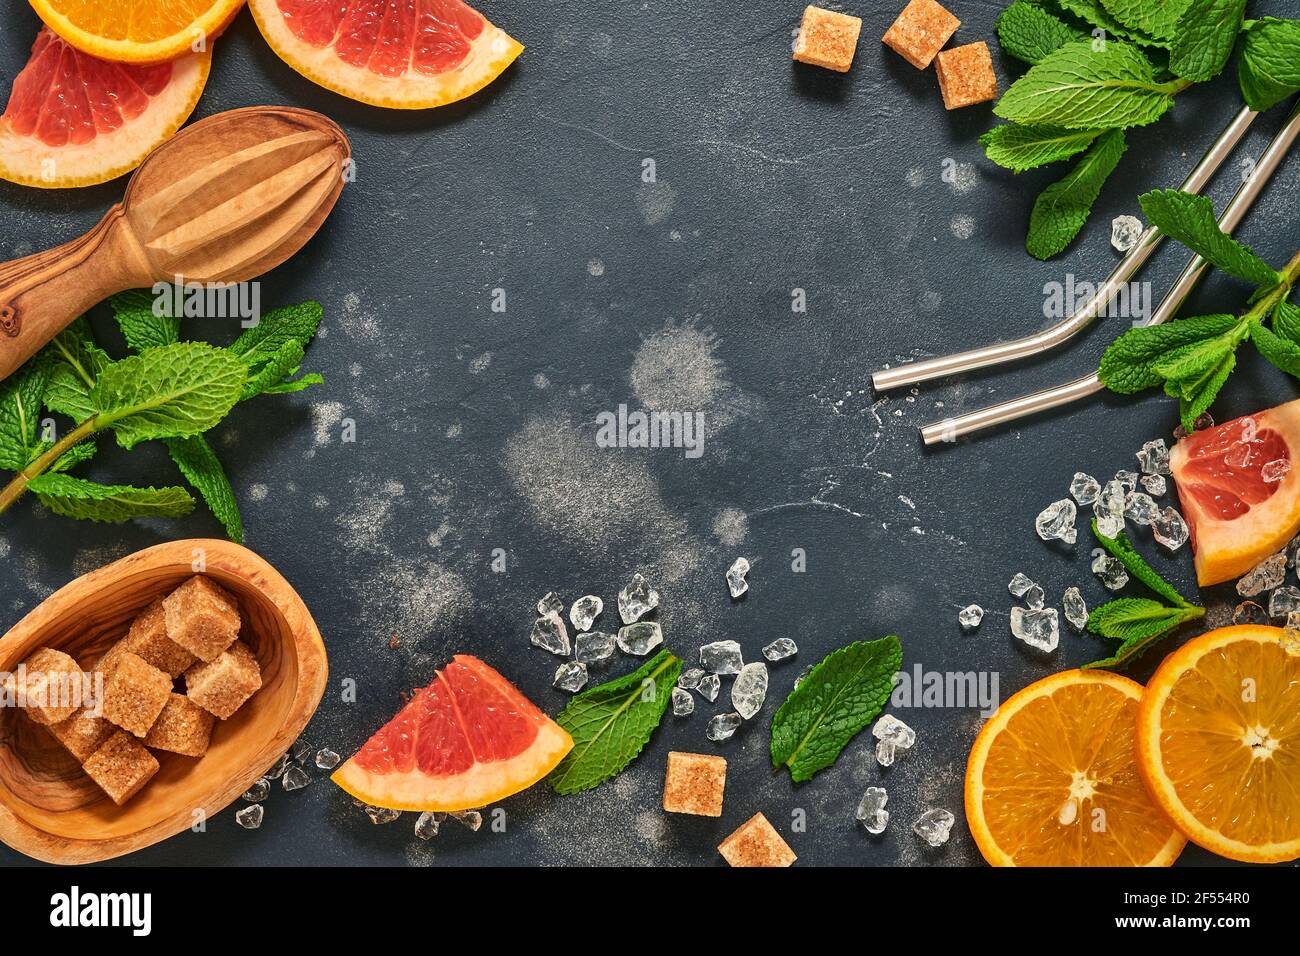 Grapefruit and orange slices, mint, cane sugar, ice, cocktail tubes, juicer or squeezer on black stone old background. Ingredients for making summer b Stock Photo